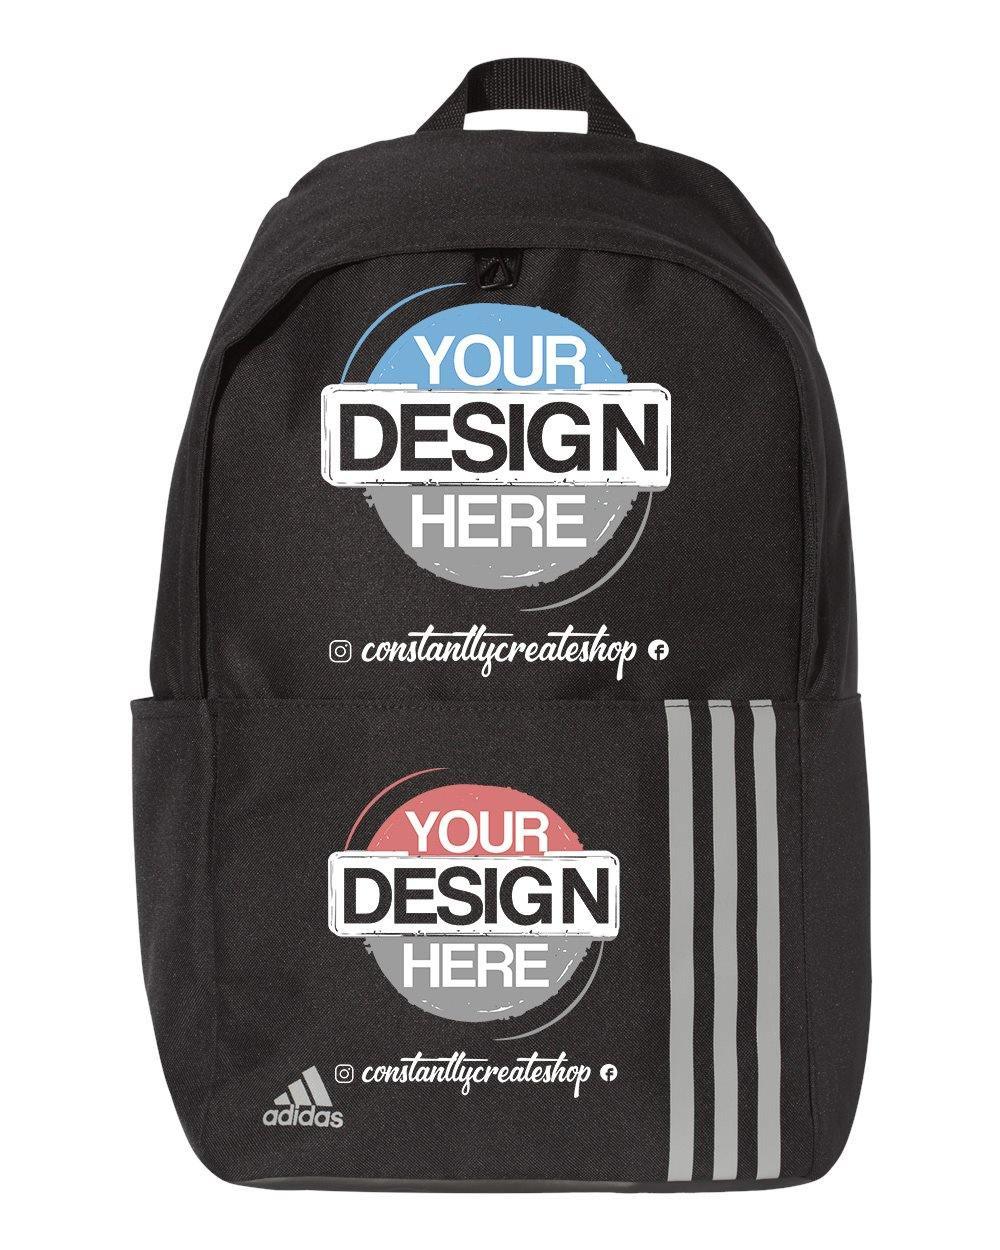 Adidas 3-Stripes Backpack - Constantly Create Shop